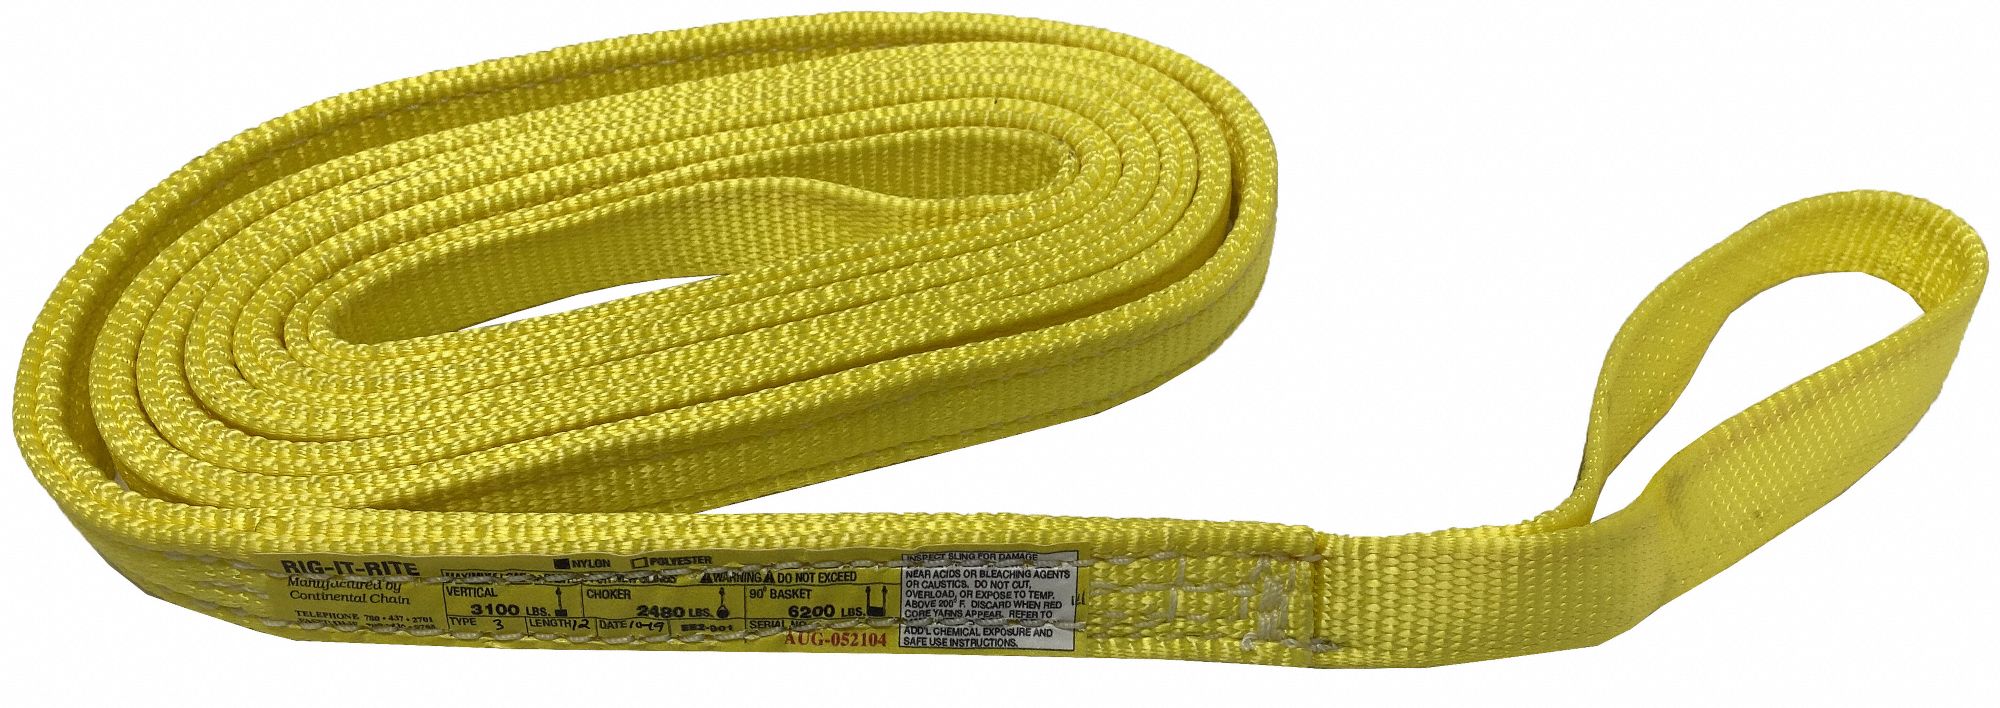 CONTINENTAL WEB SLING, TYPE 4, TWISTED EYE AND EYE, HEAVY LIFTING, 2-PLY,  YELLOW, 6 FT X 1 IN, 9 IN EYE, NYLON - Web Slings - CCGEE2-901X6T4N